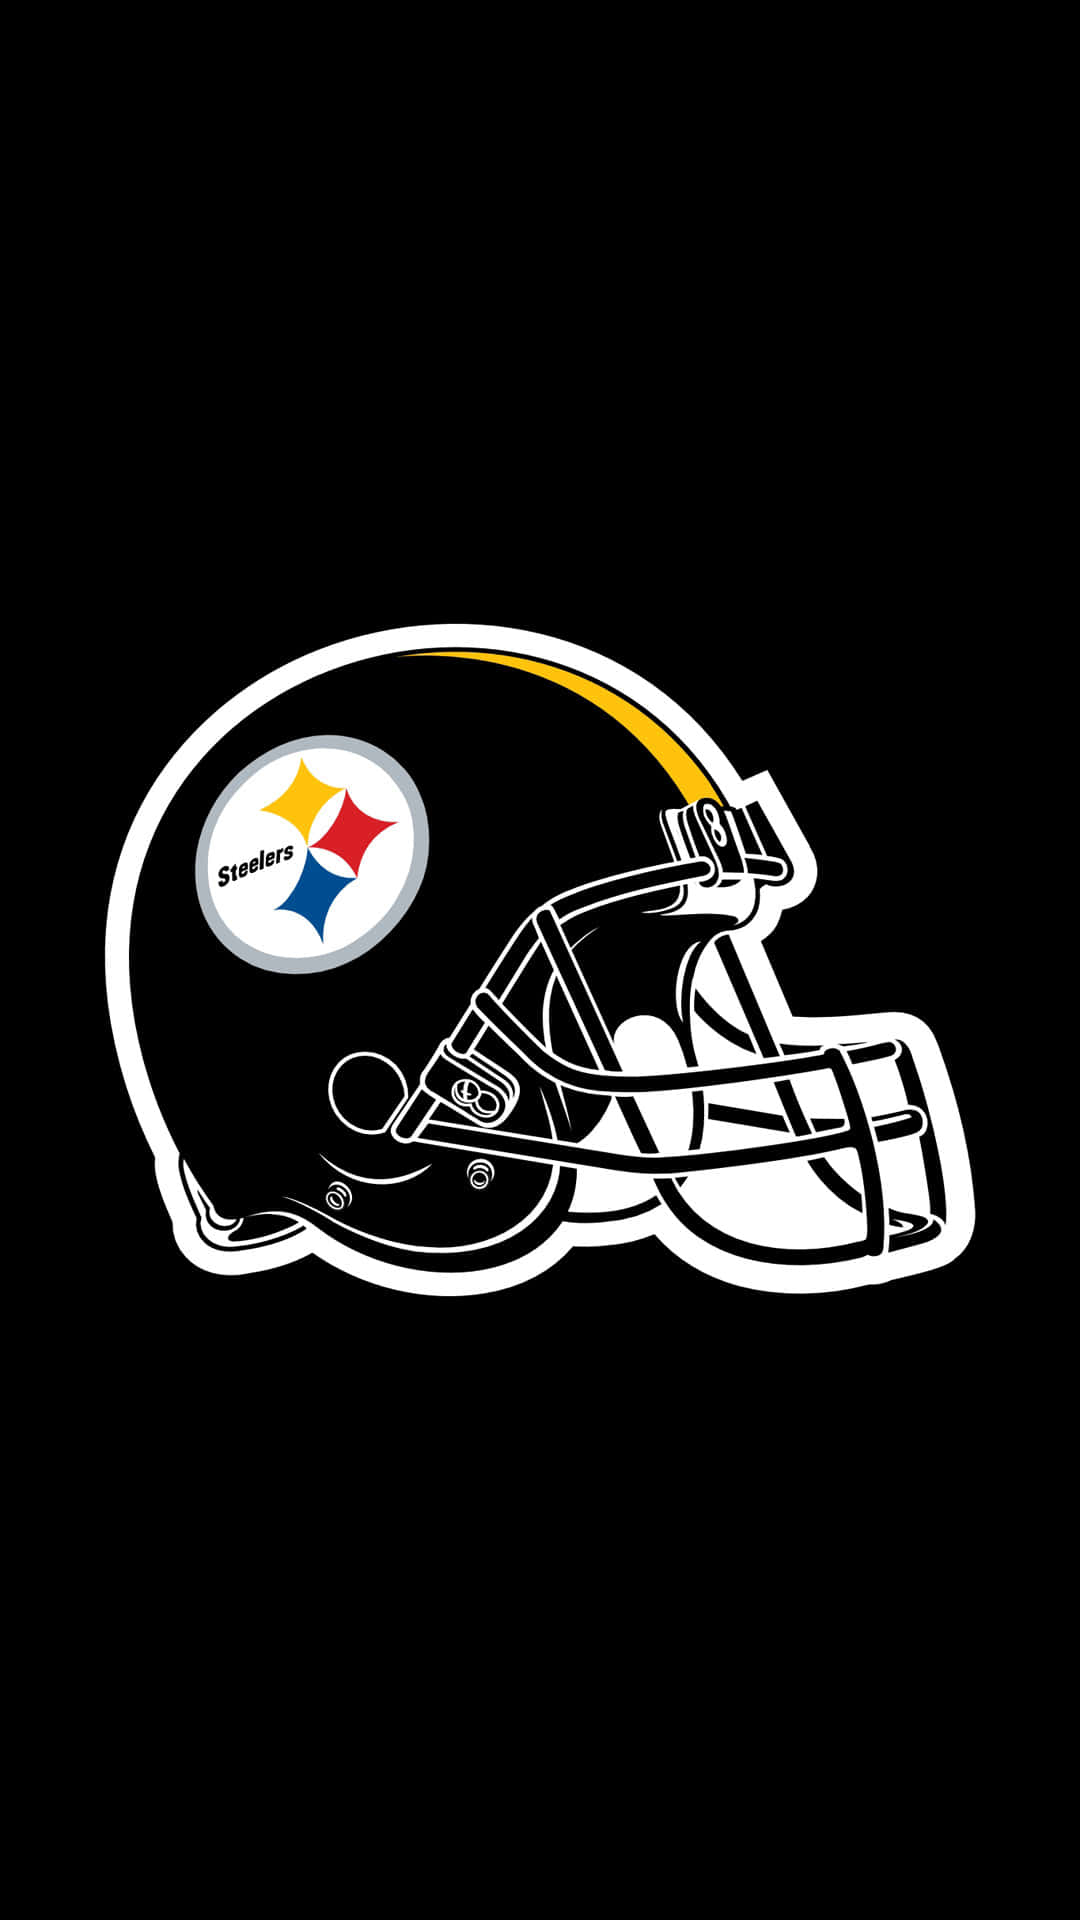 Steelers Fans Get Ready For the Game Wallpaper